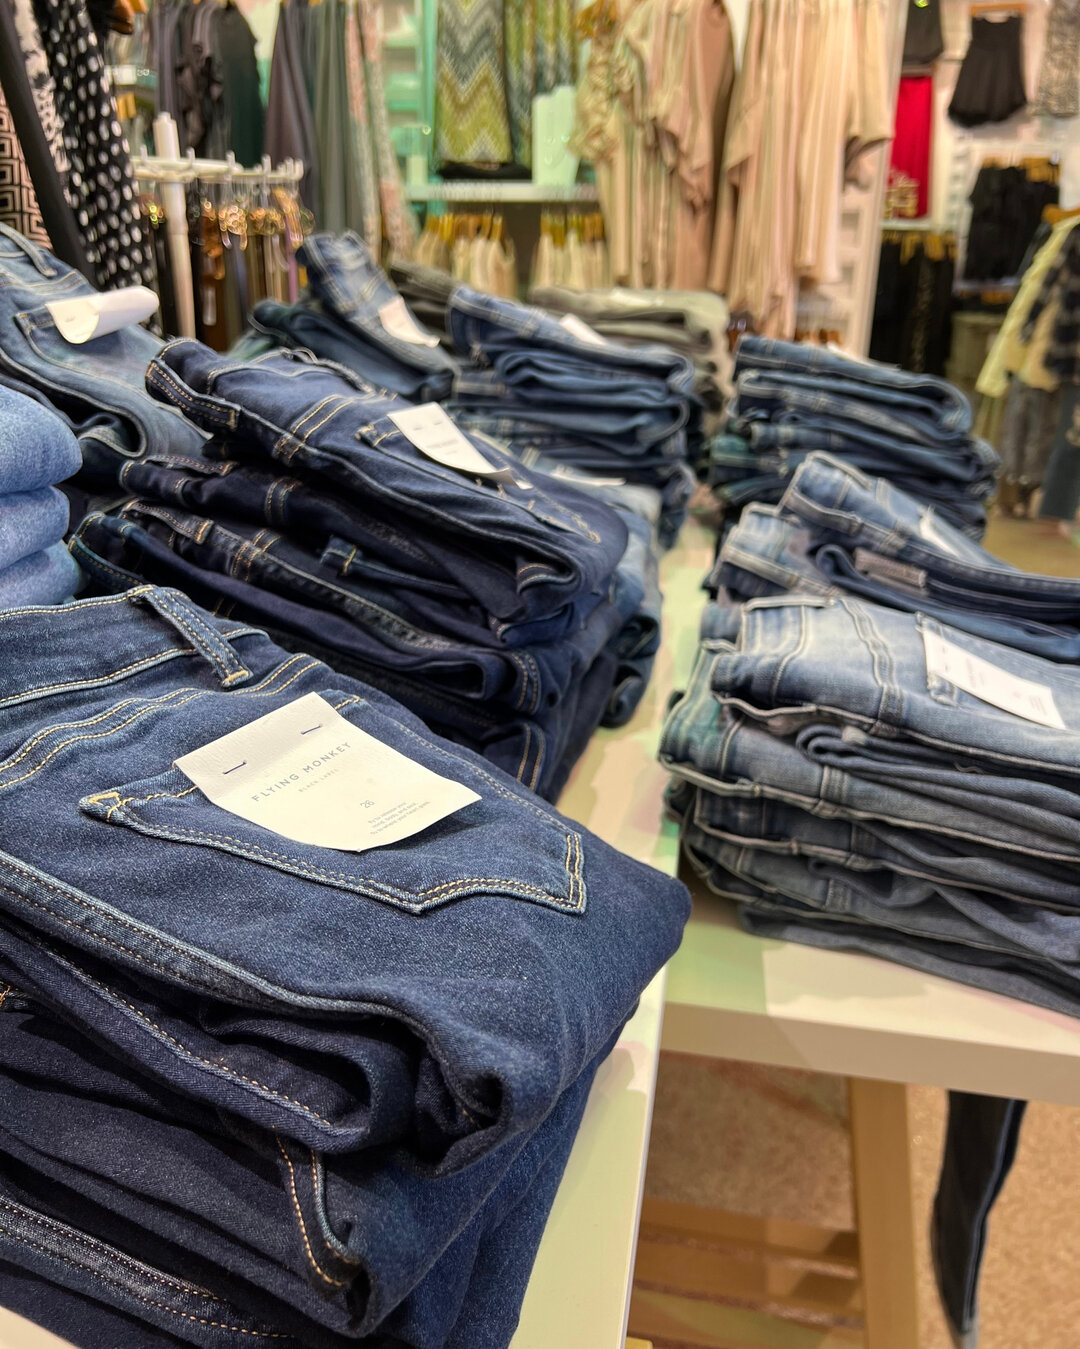 How&rsquo;s your denim selection?​​​​​​​​​
Missing a skinny? straight leg? mom jean? flare?

Shop our great selection and find what you need!